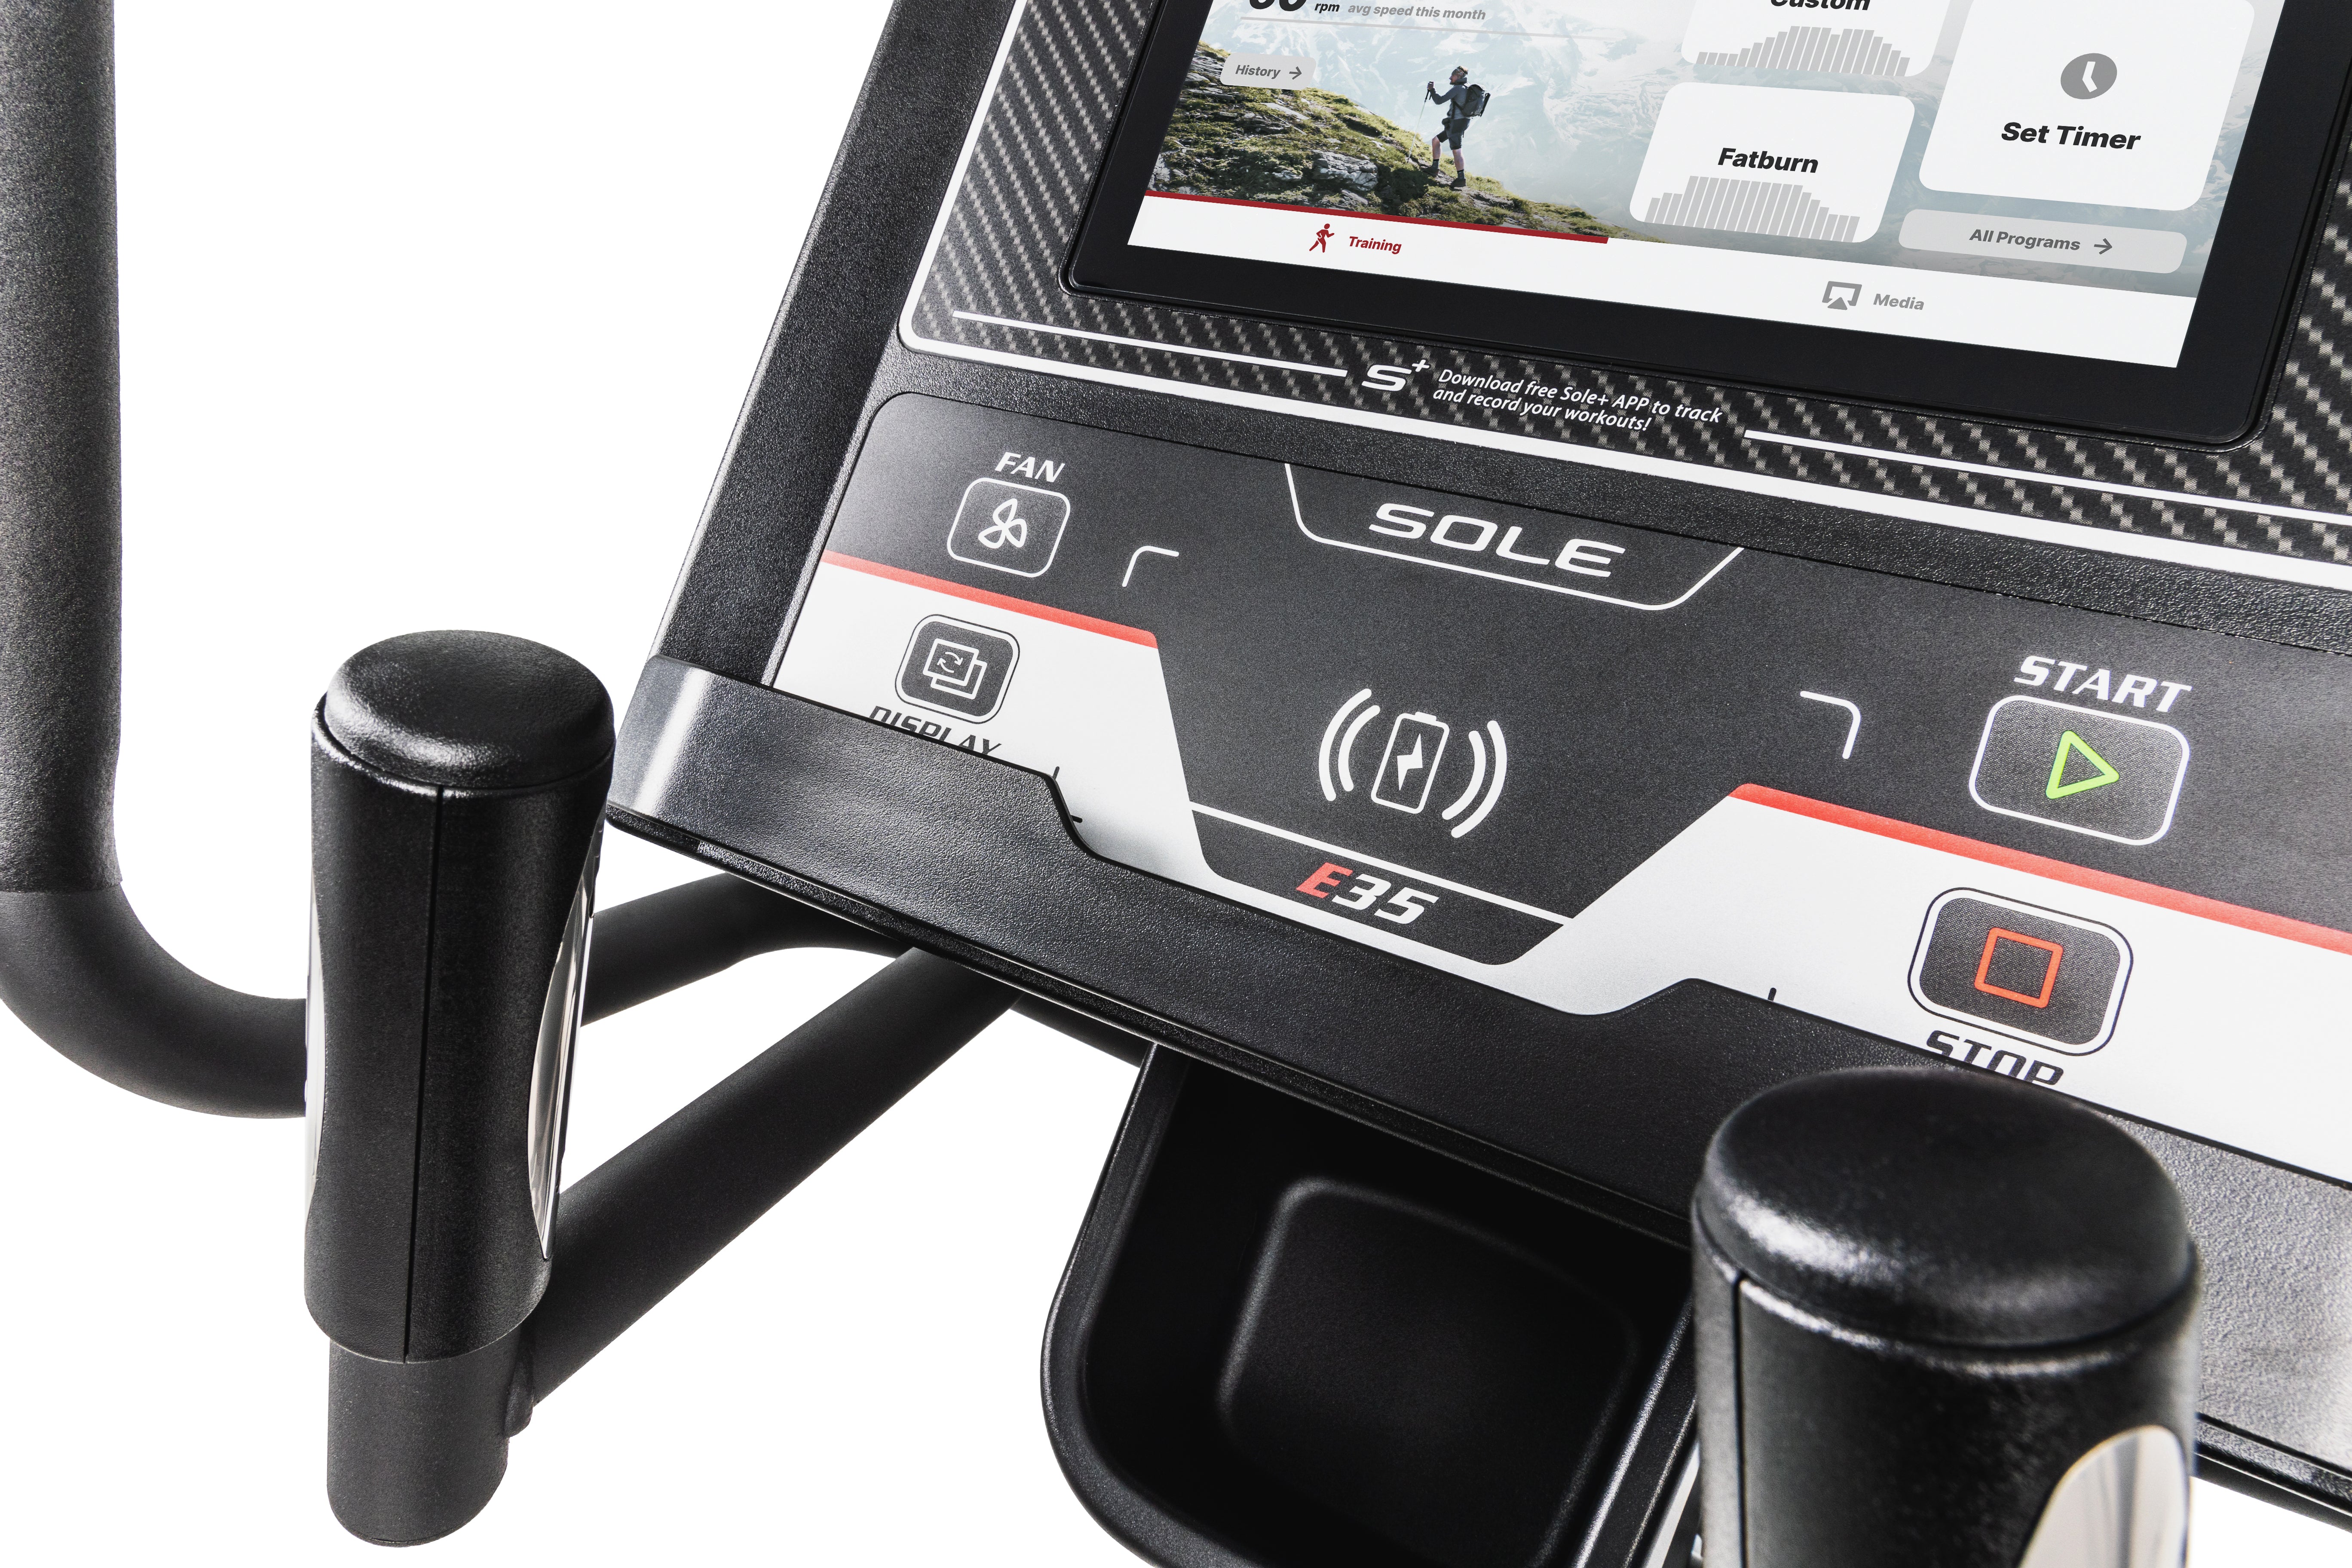 Side view of the Sole E35 elliptical trainer showcasing its sleek design, adjustable pedals, and control panel.